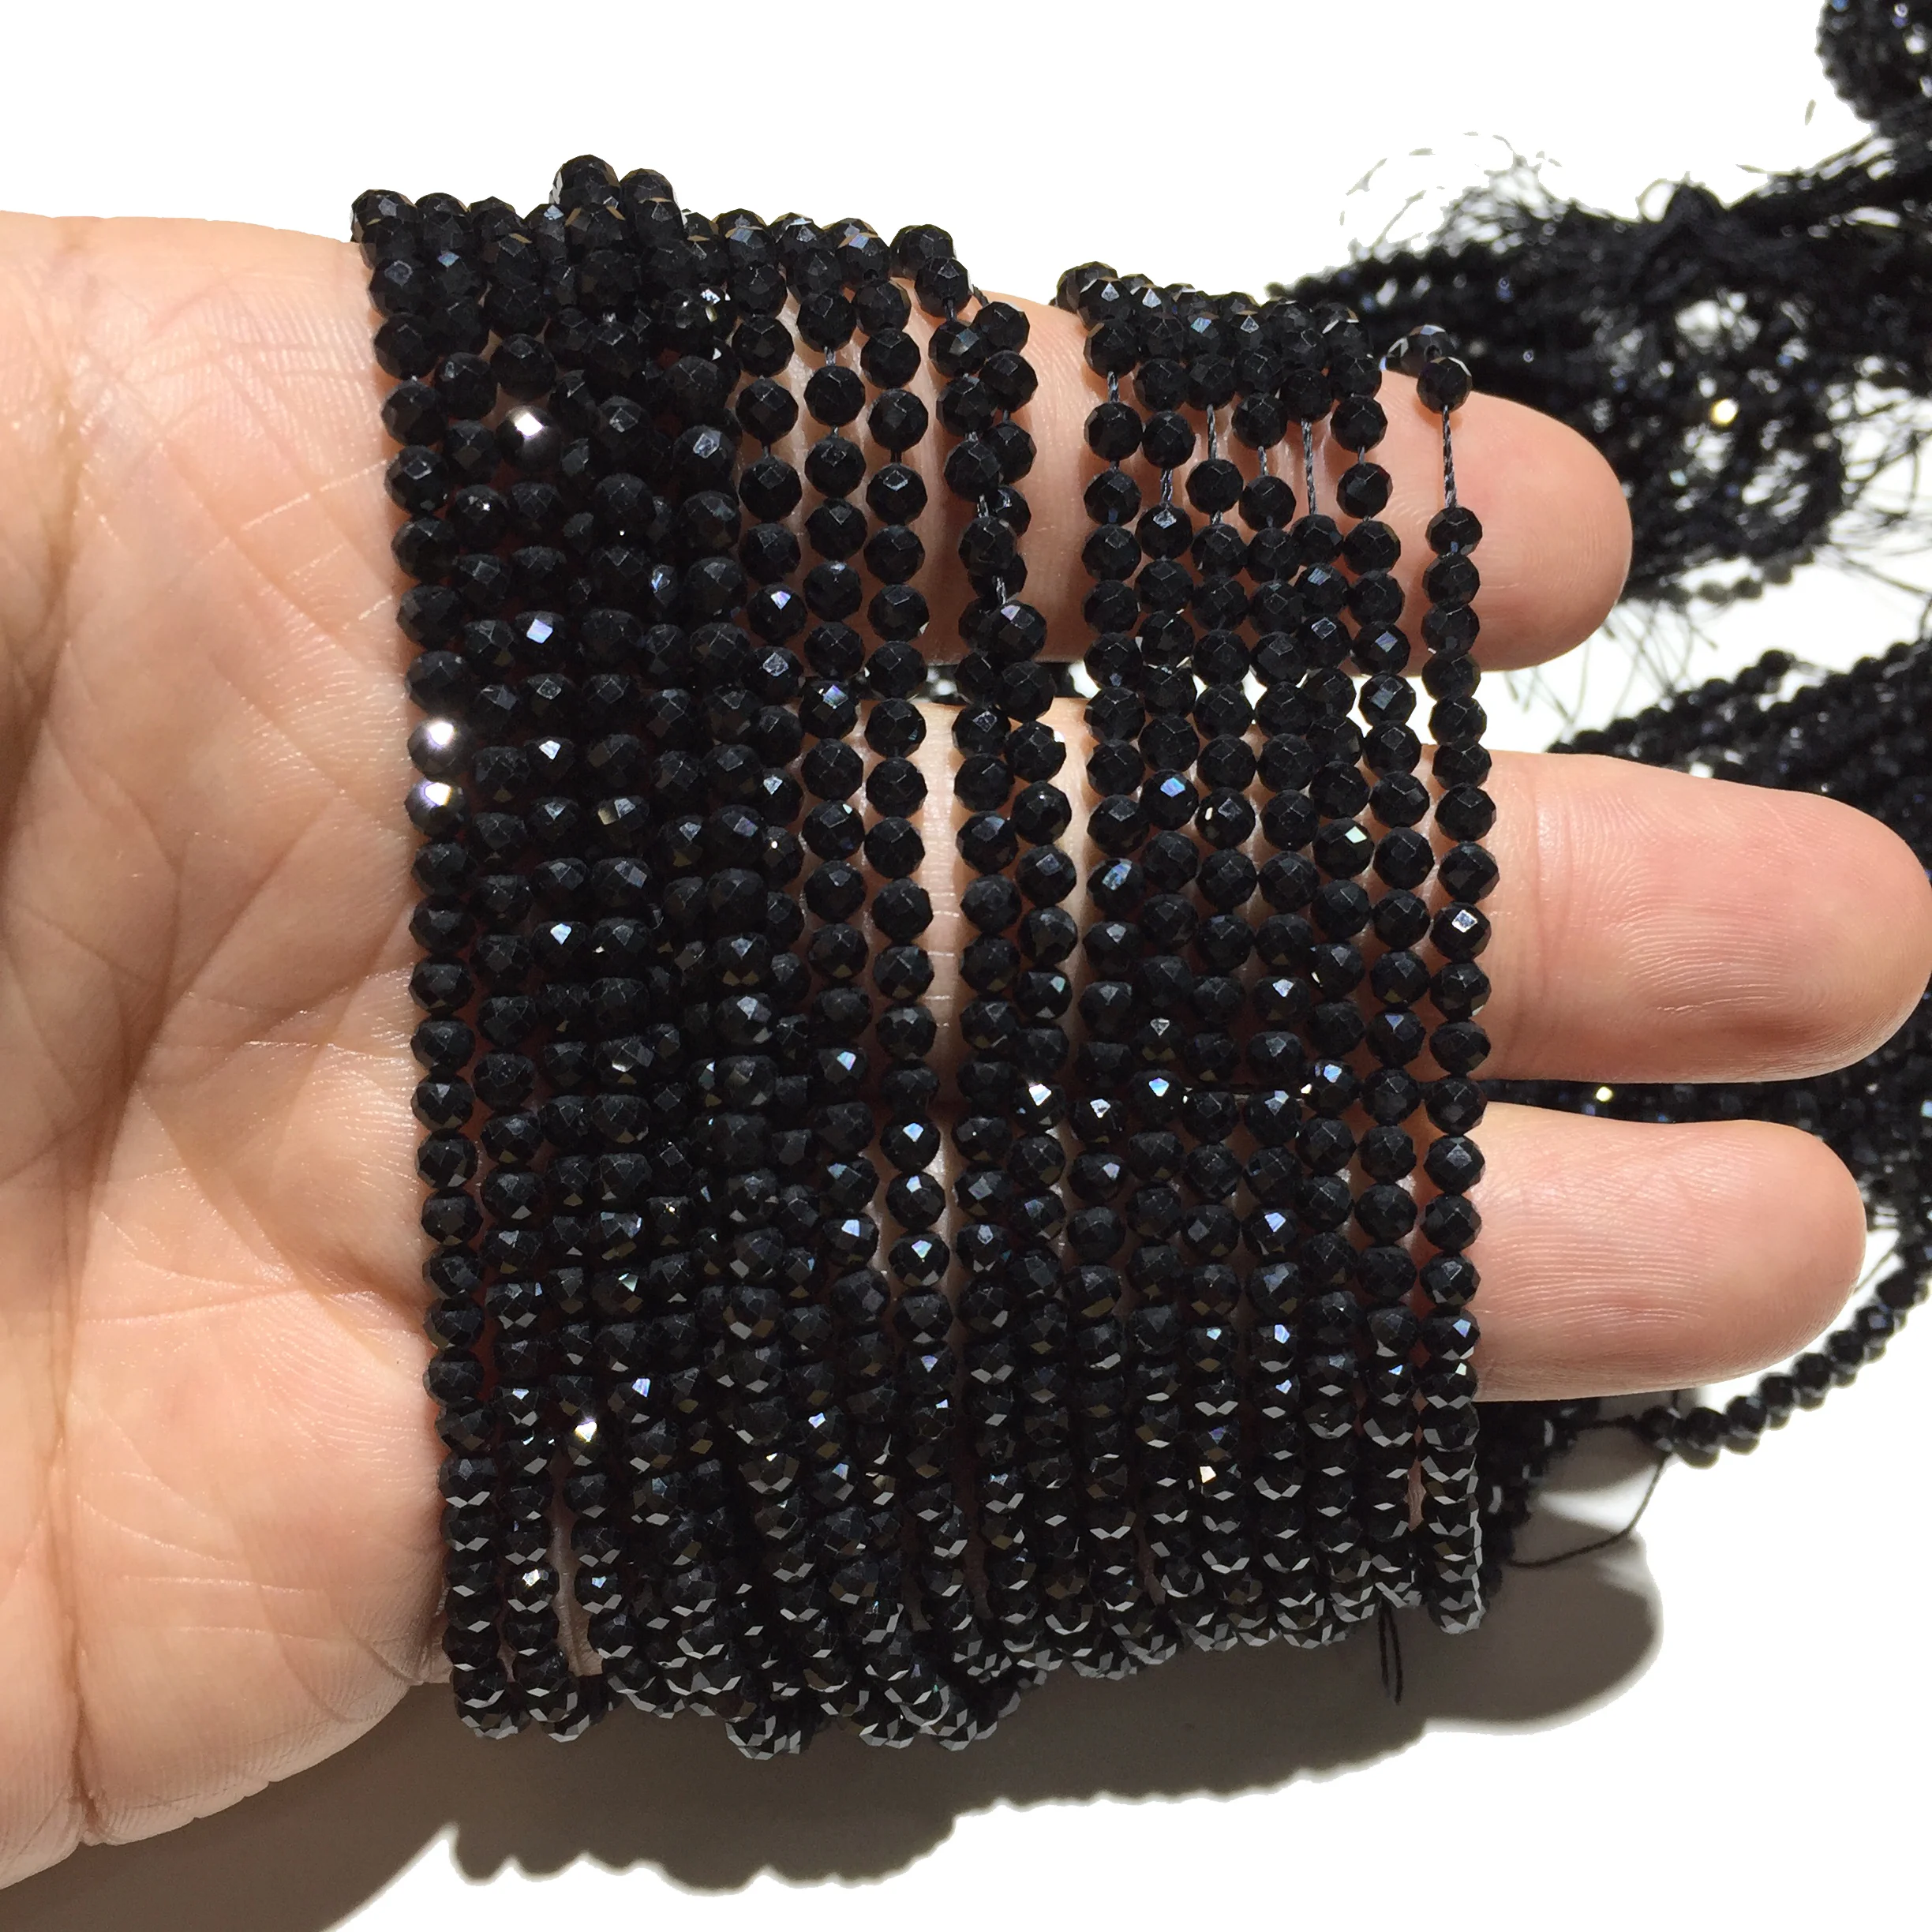 Natural Black Spinel Beads Small Faceted Gemstone Beads Jewelry Beads for Jewelry Making Beads For Jewelry Beads and Supplies Beads Supplier